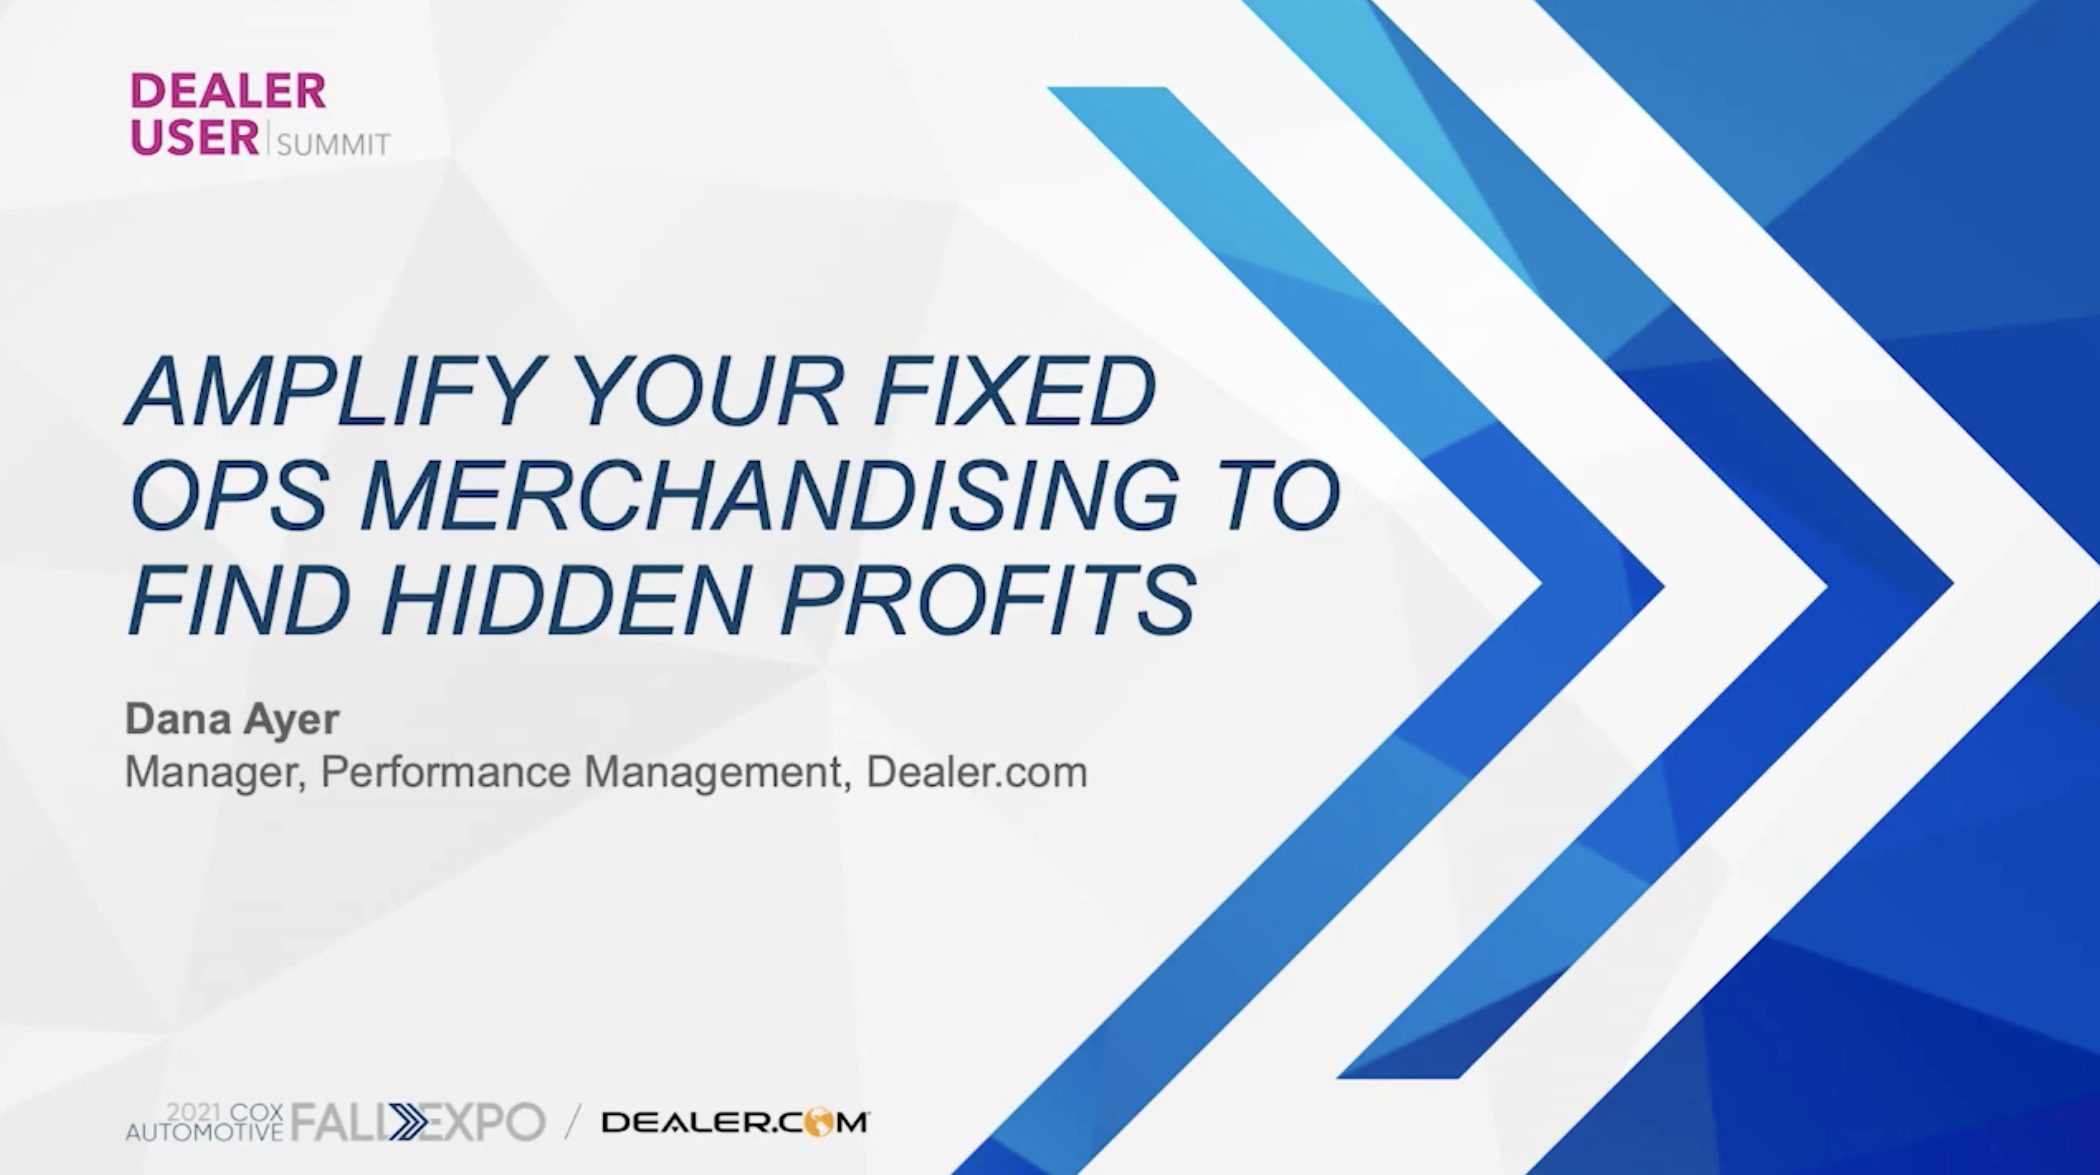 Amplify Your Fixed Ops Merchandising to Find Hidden Profits